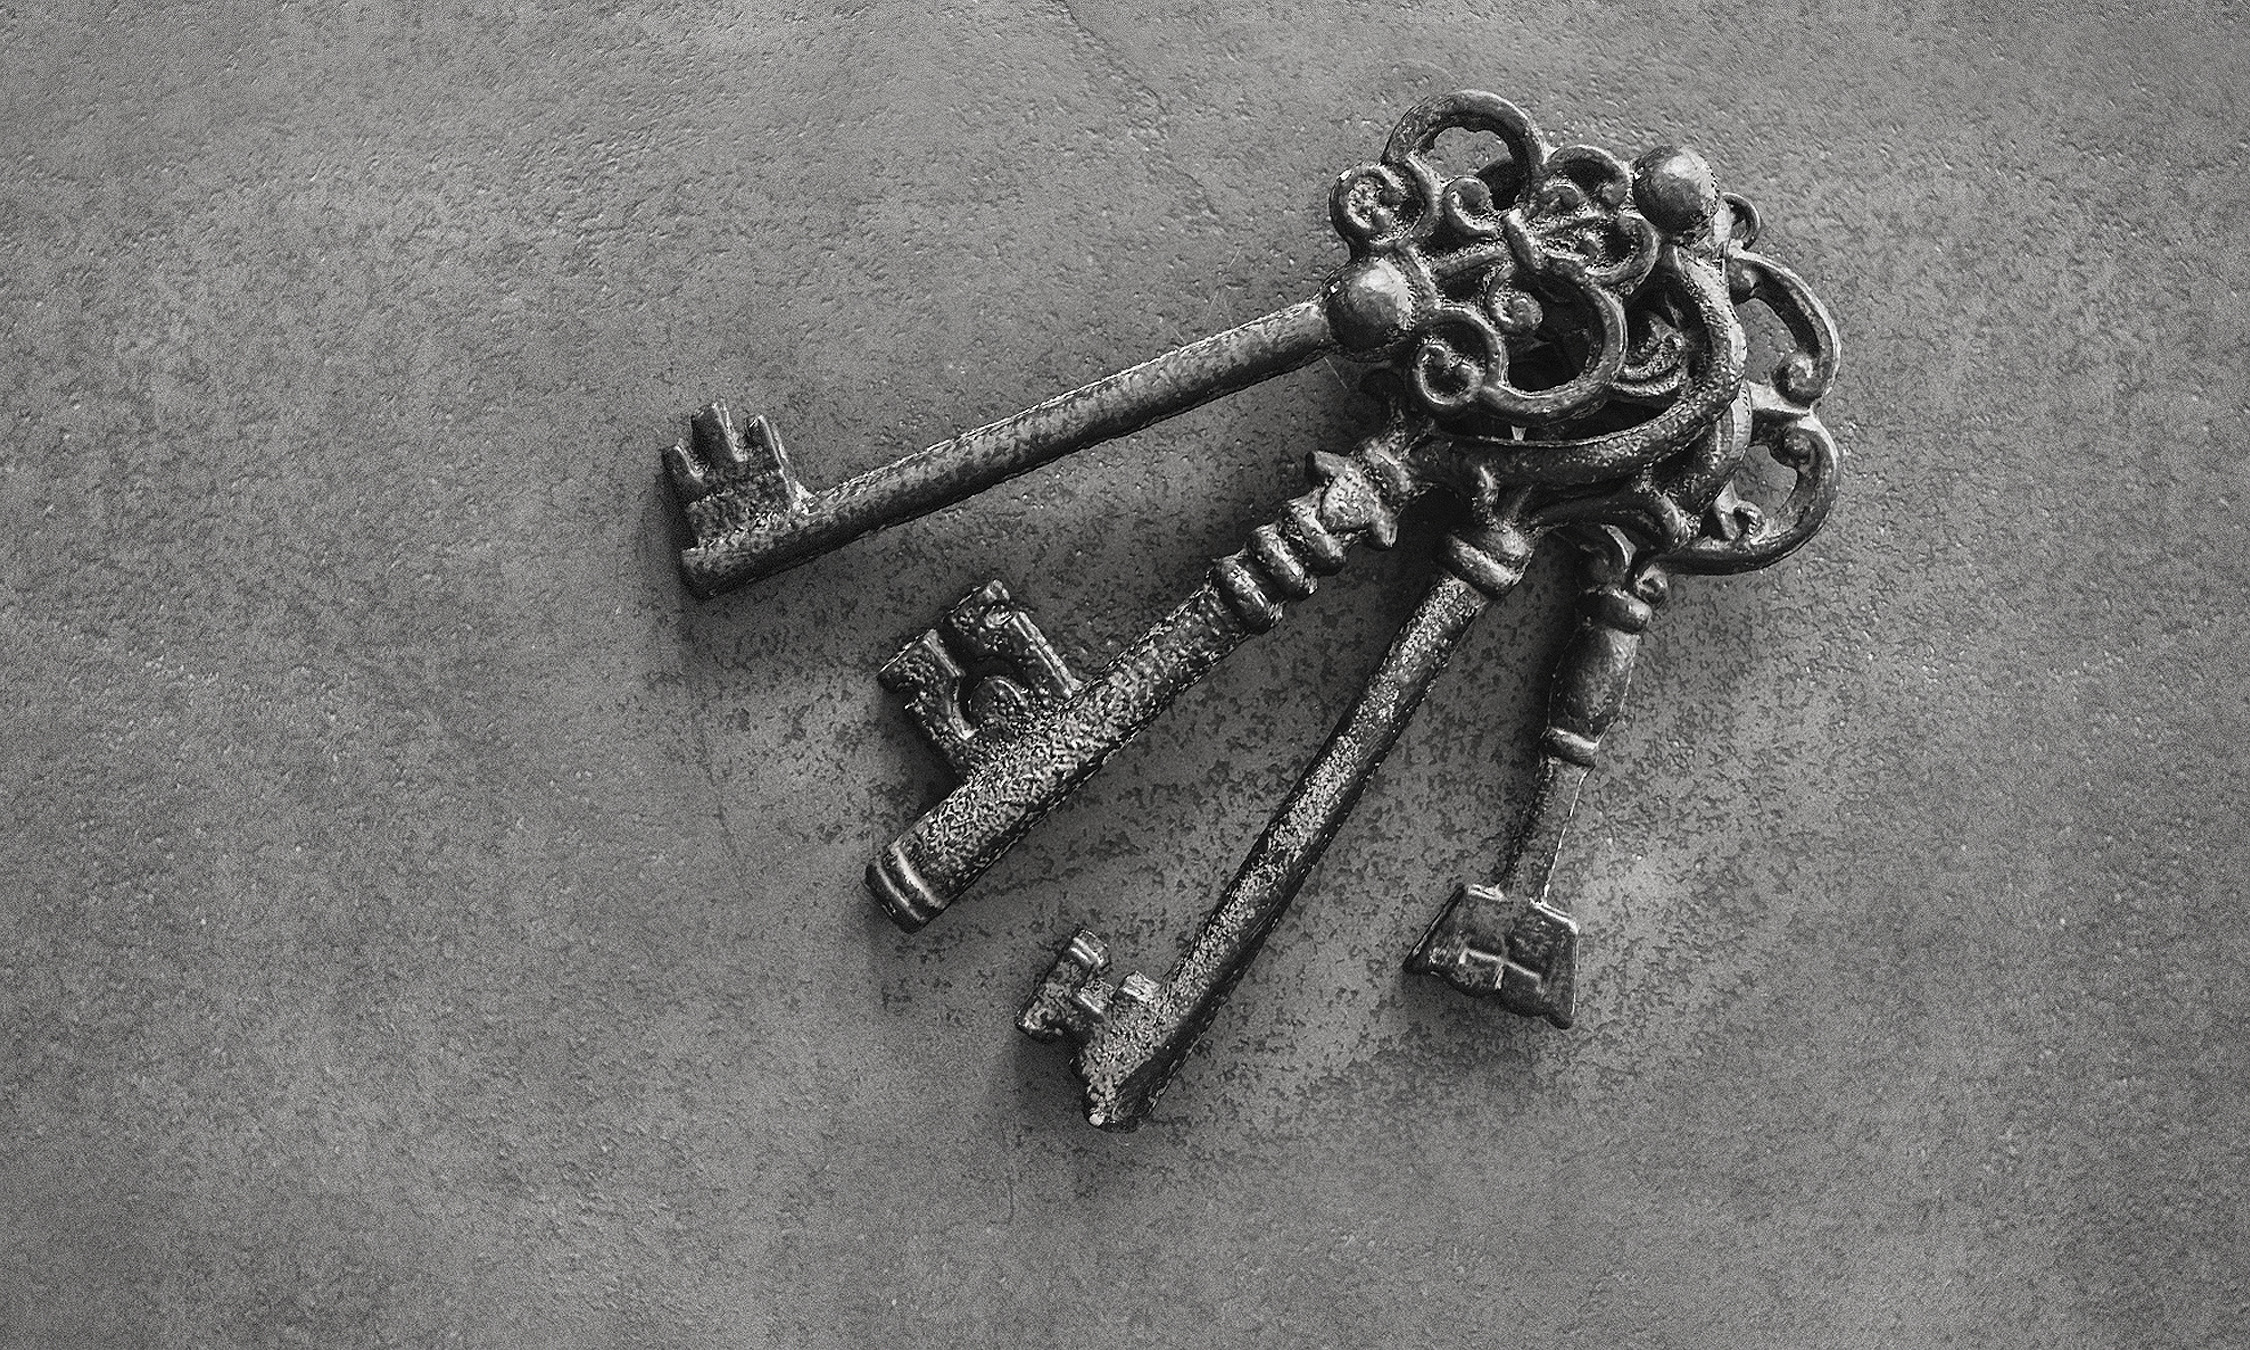 Vintage keys used as the privacy policy image for The Mane House salon in Biddenden.